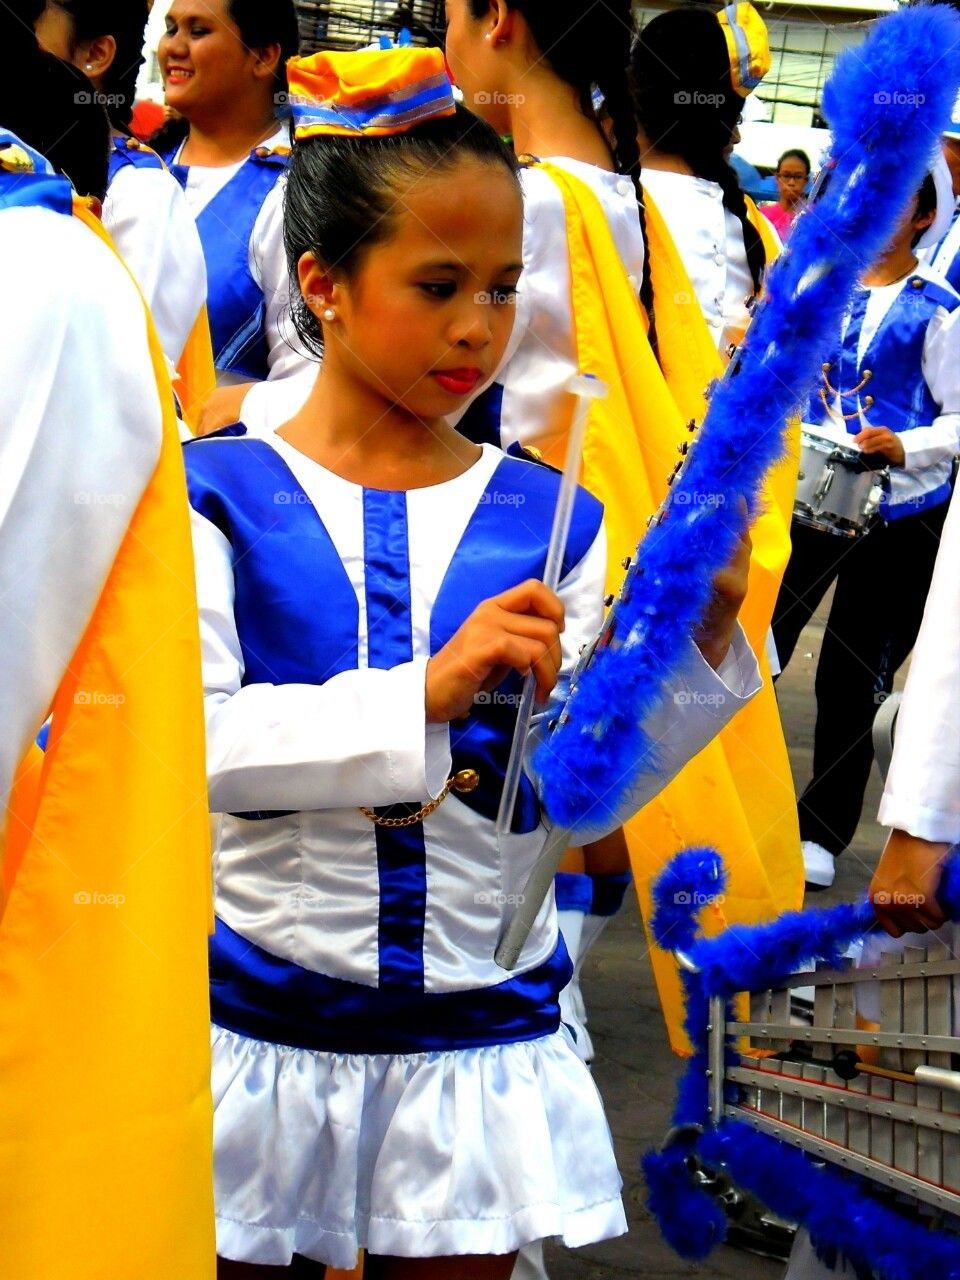 Member of a marching band playing the xylophone at a feast in